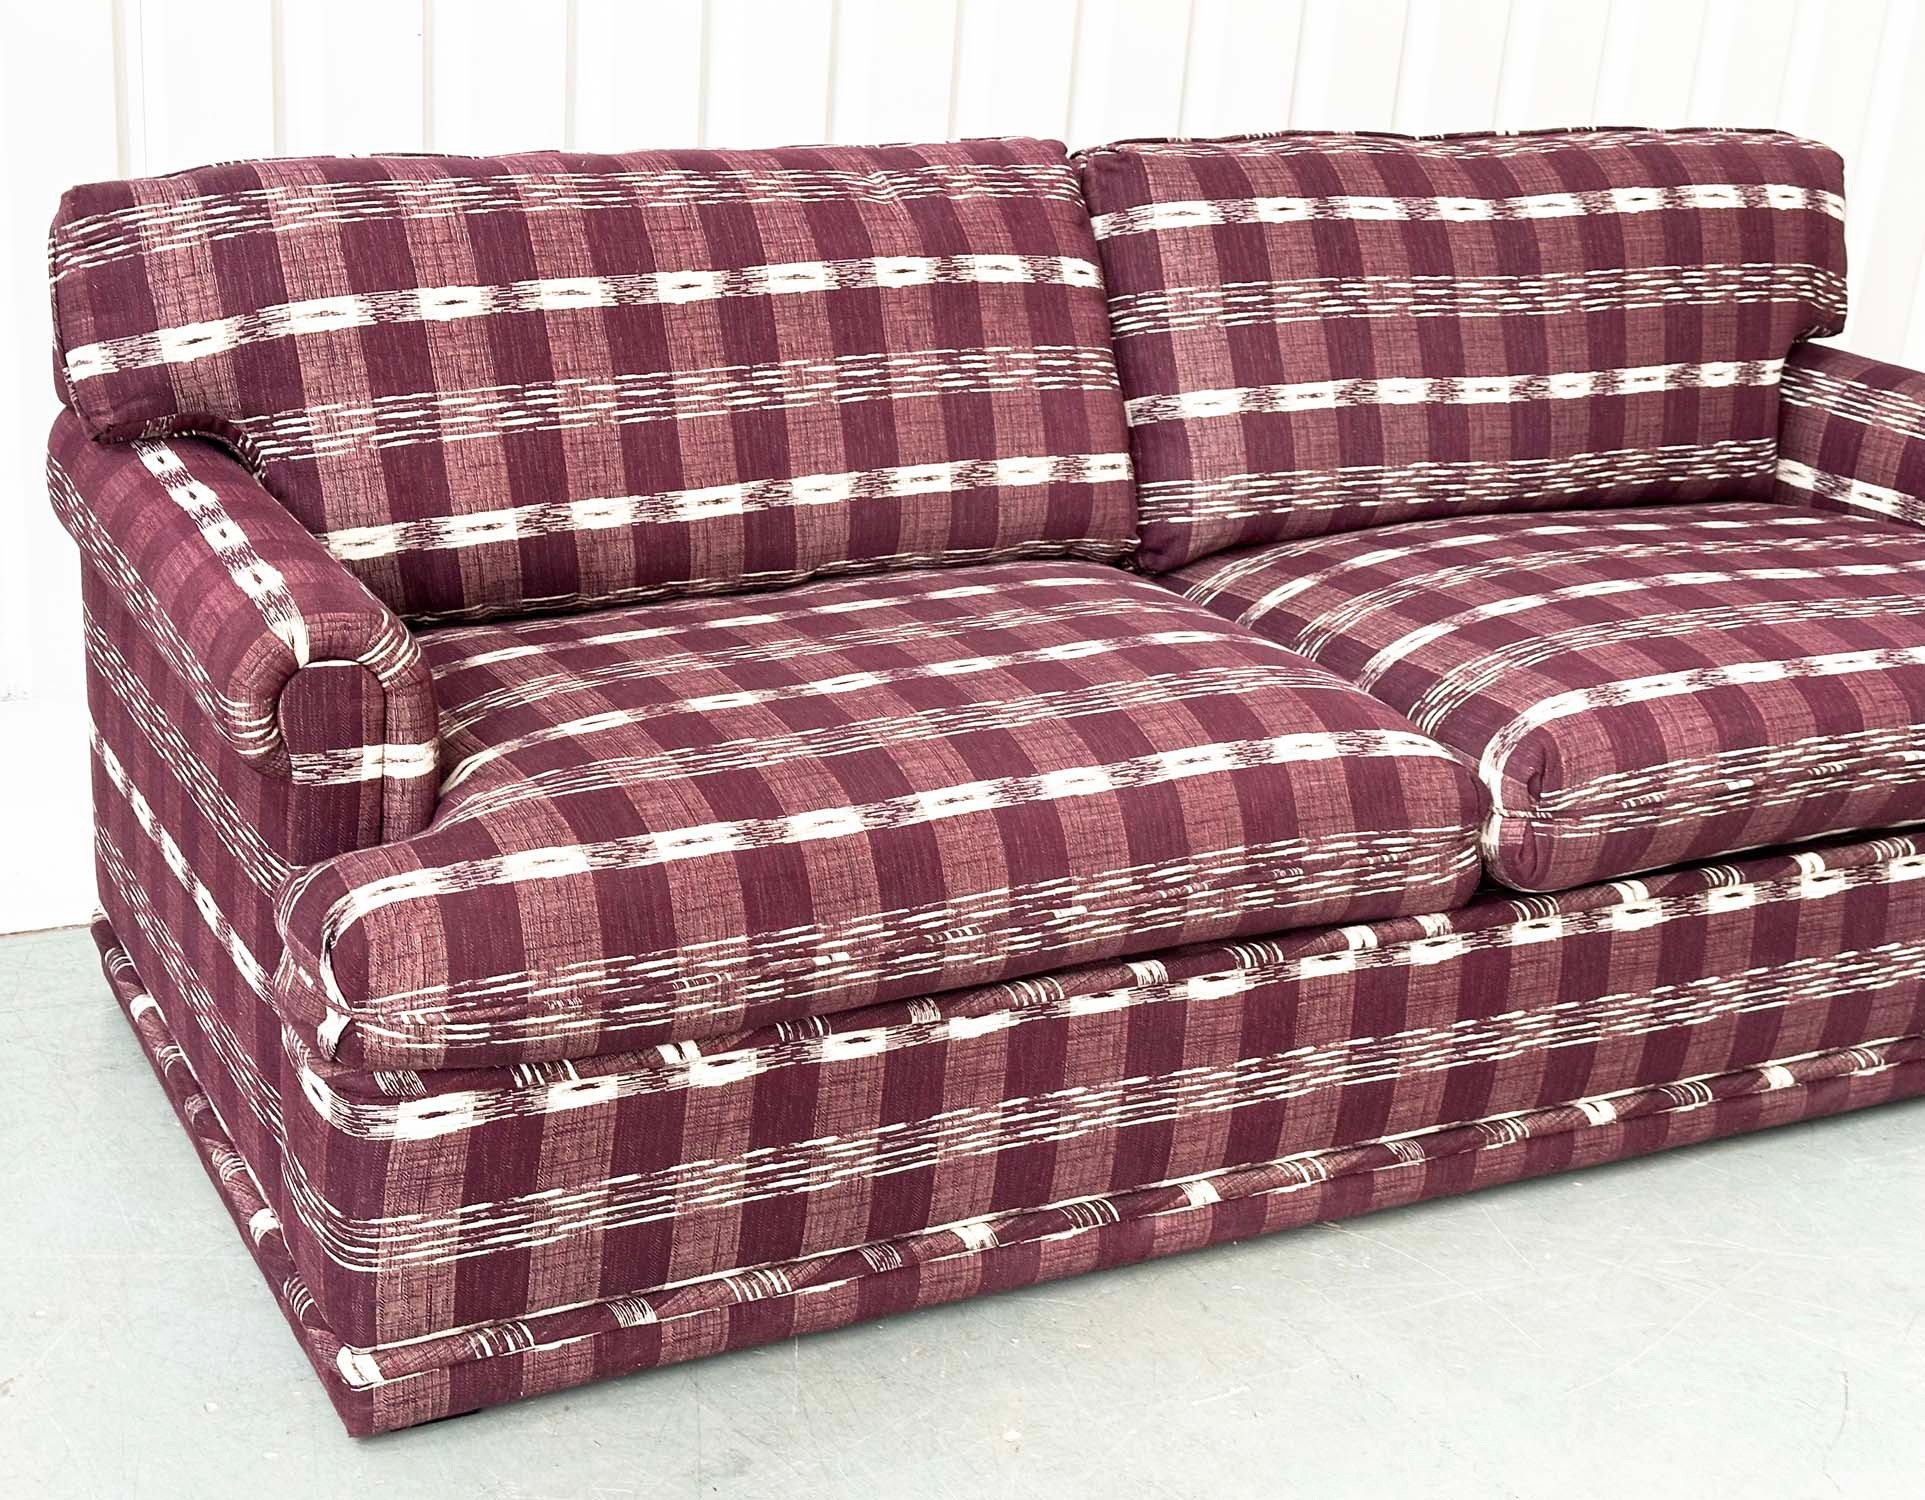 SOFA, Swedish check purple/white upholstery with scroll arms, 203cm W. - Image 11 of 18